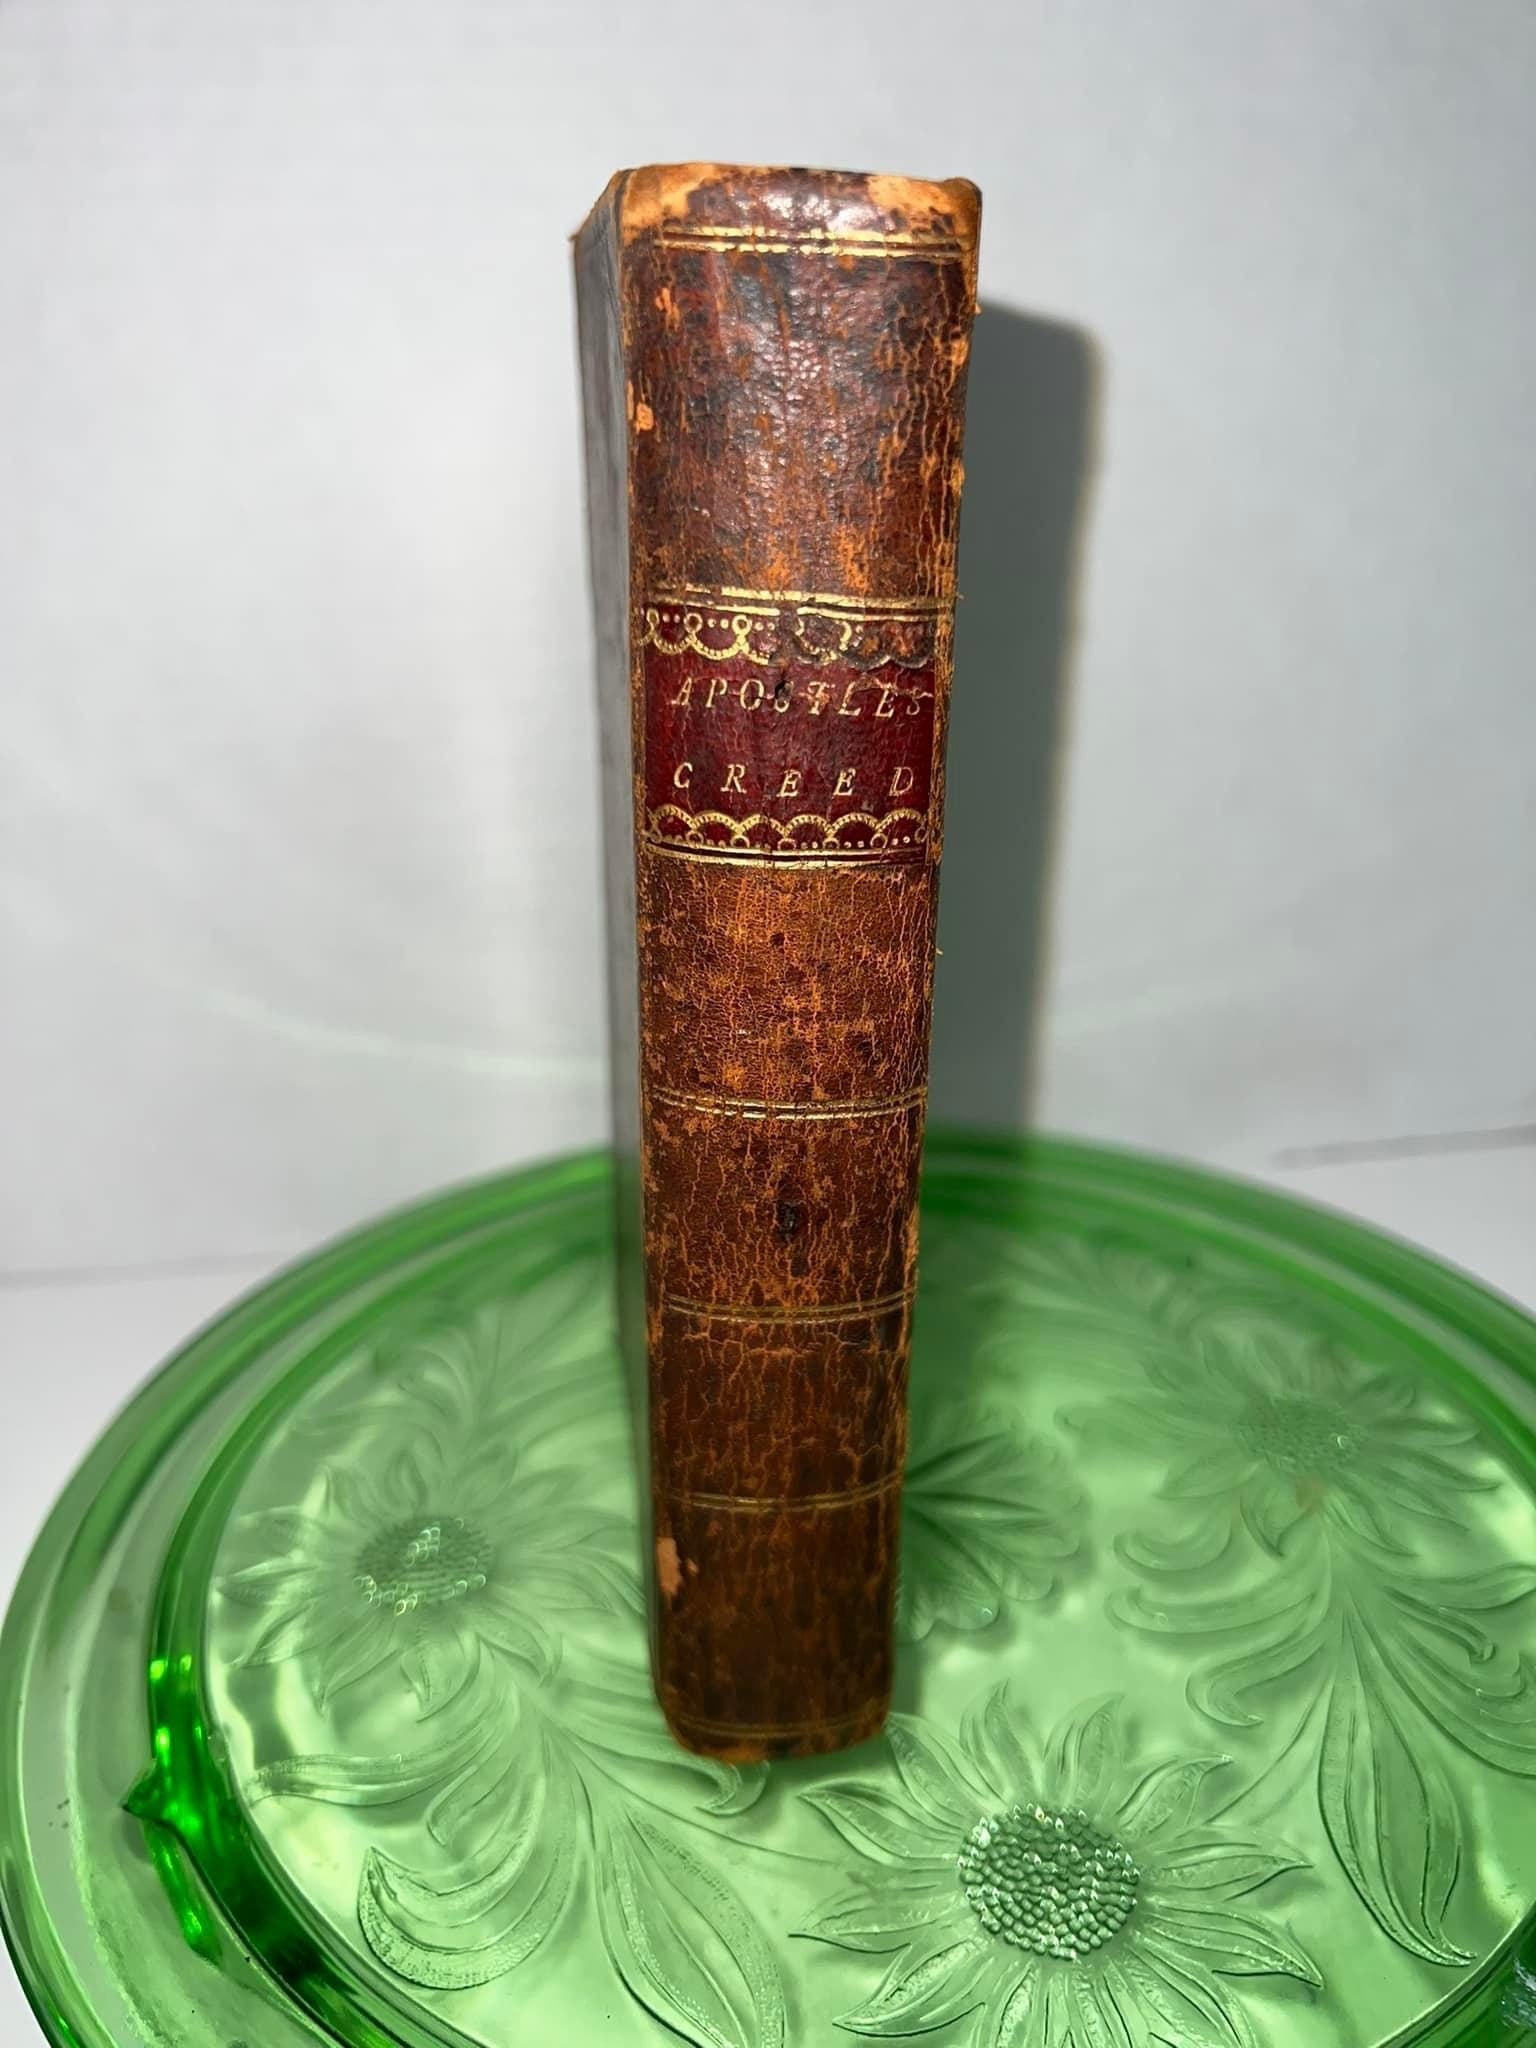 Antique pre civil war The history of The apostle’s creed 1804 first American edition Leather bound religious